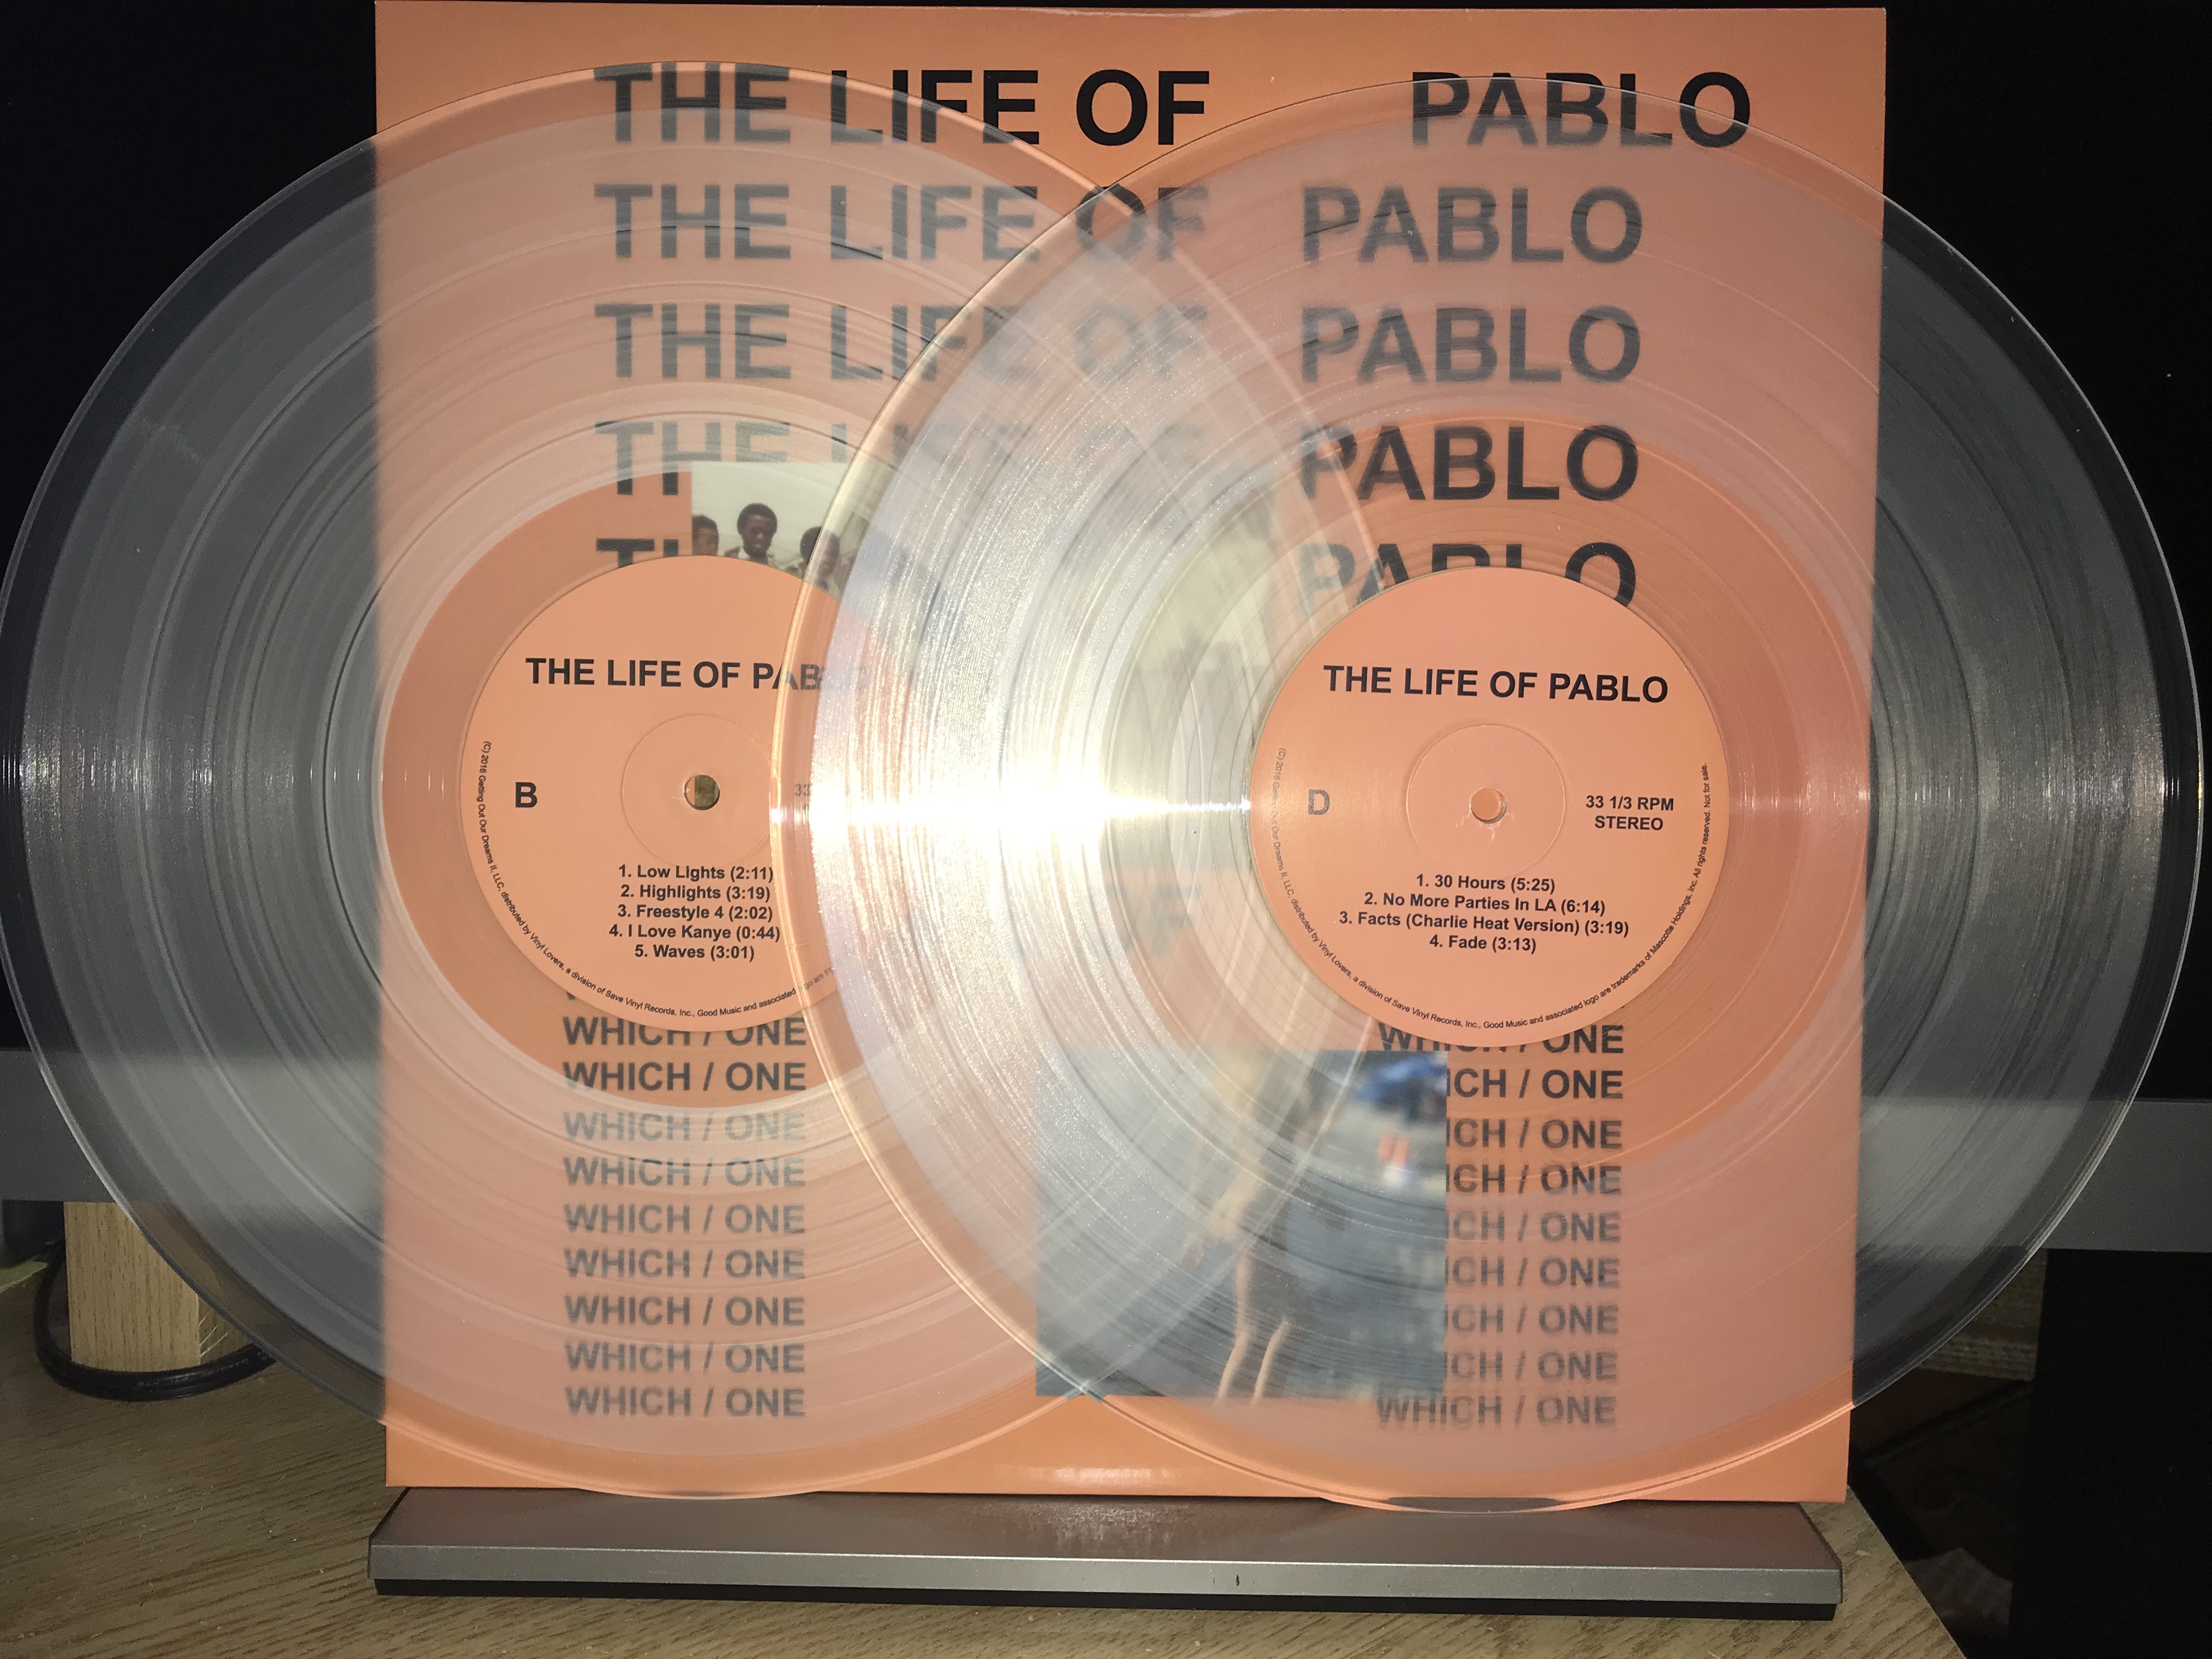 The life of pablo. The Life of Pablo винил. Vinyl Kanye West- the Life of Pablo. Kanye West Vinyl. Vinyl records Kanye West.